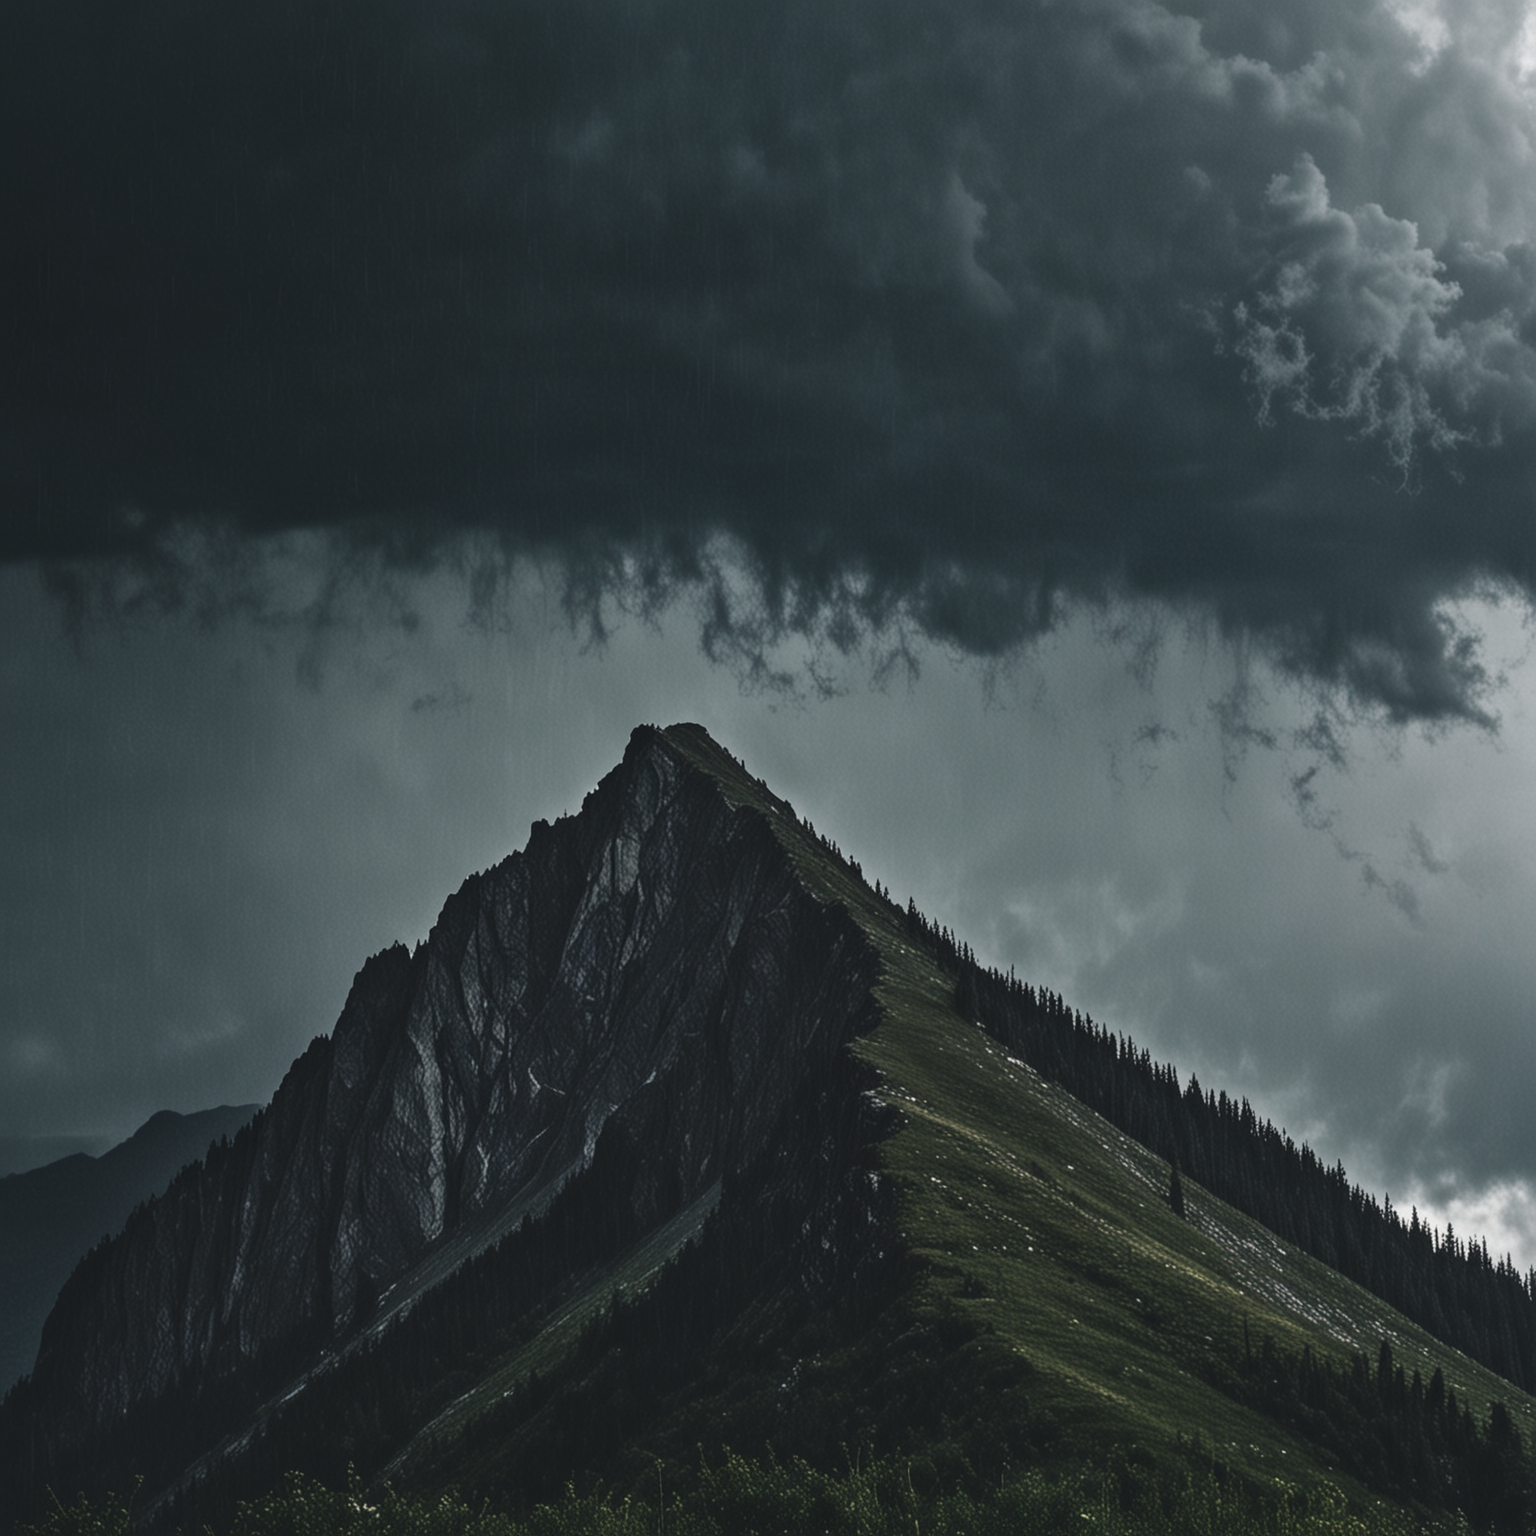 Stormy Mountain Landscape with Dark Clouds and Rain